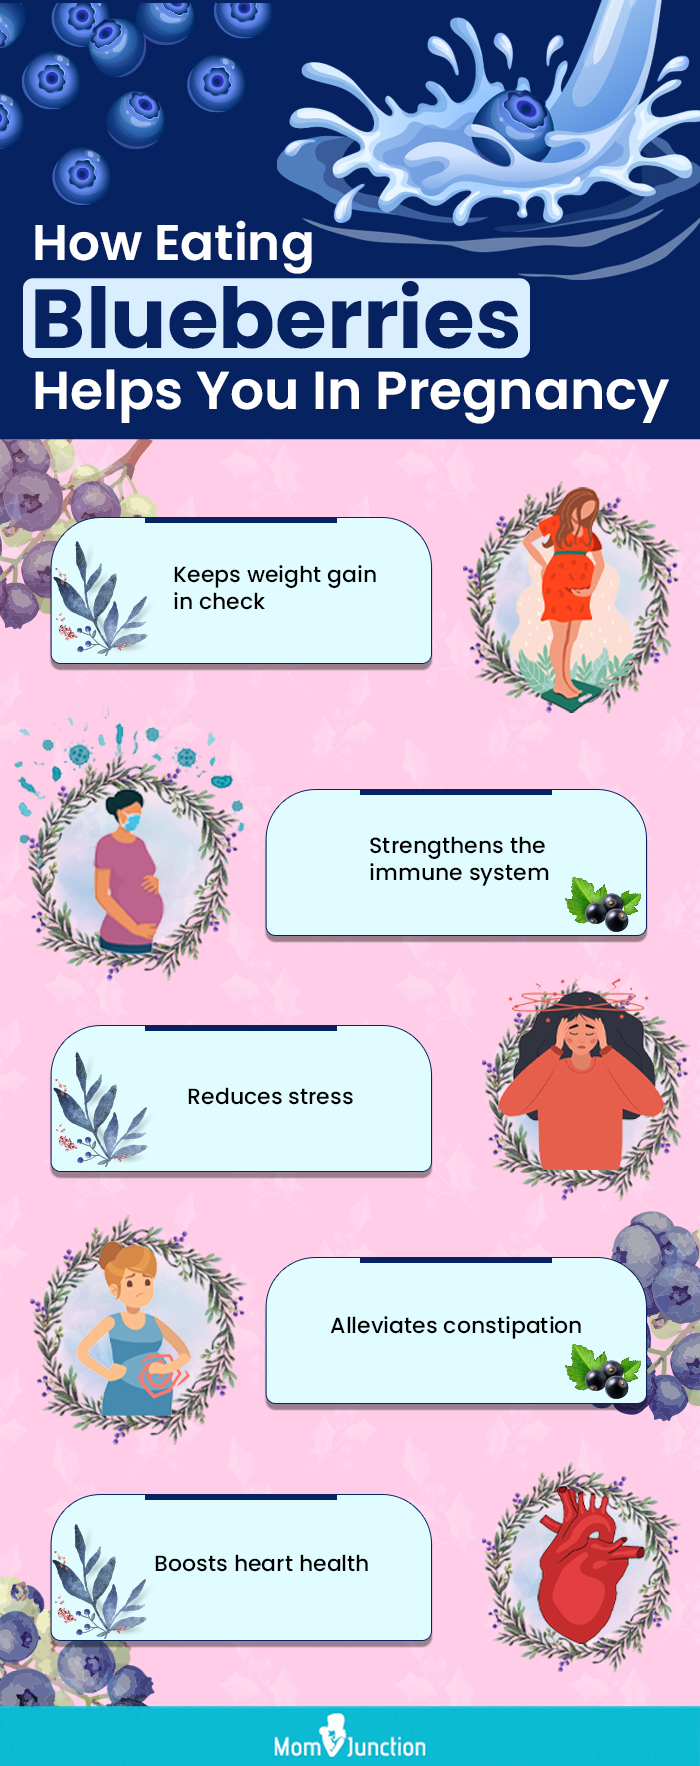 how eating blueberries helps you in pregnancy (infographic)